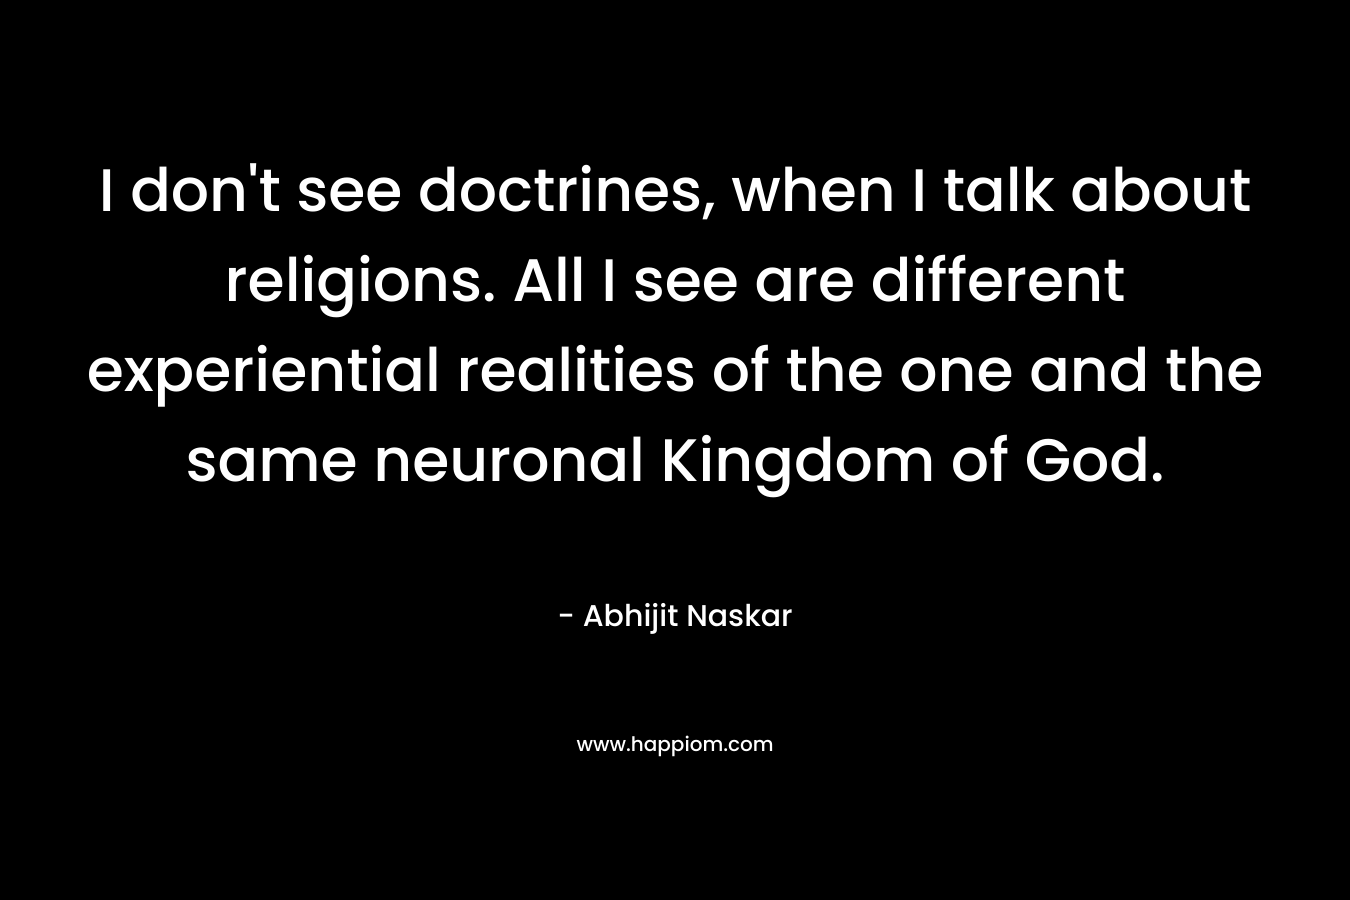 I don't see doctrines, when I talk about religions. All I see are different experiential realities of the one and the same neuronal Kingdom of God.